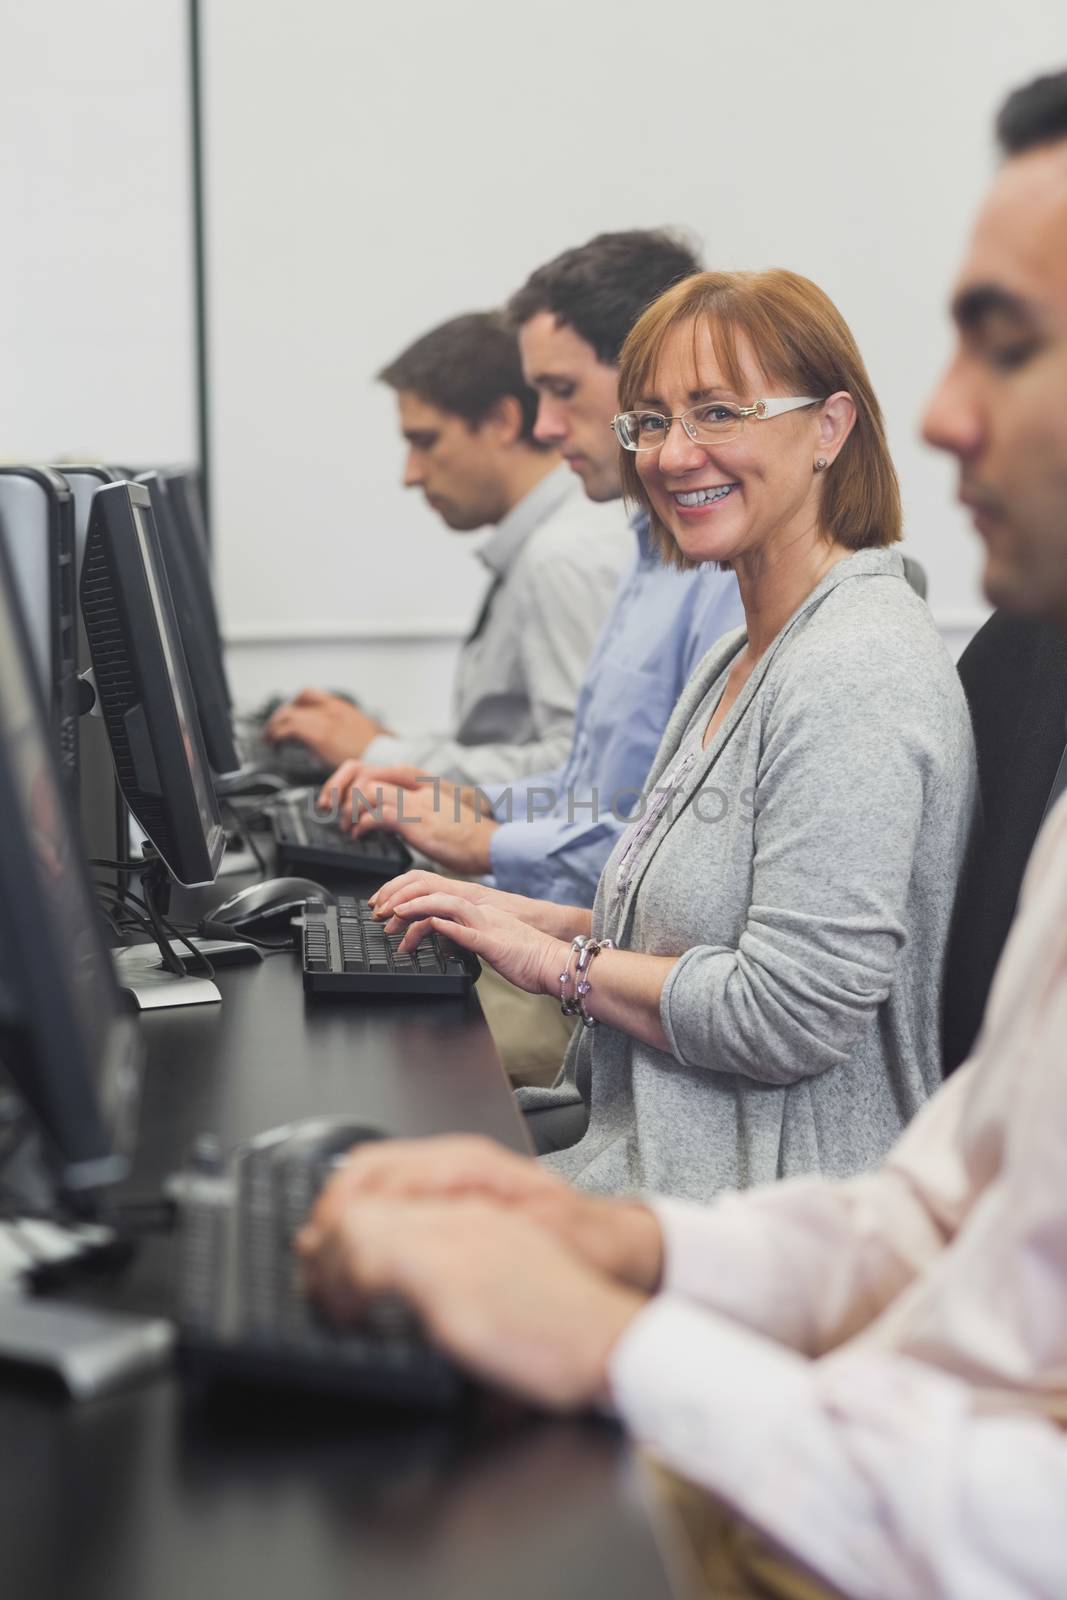 Female mature student sitting in computer class smiling at camera